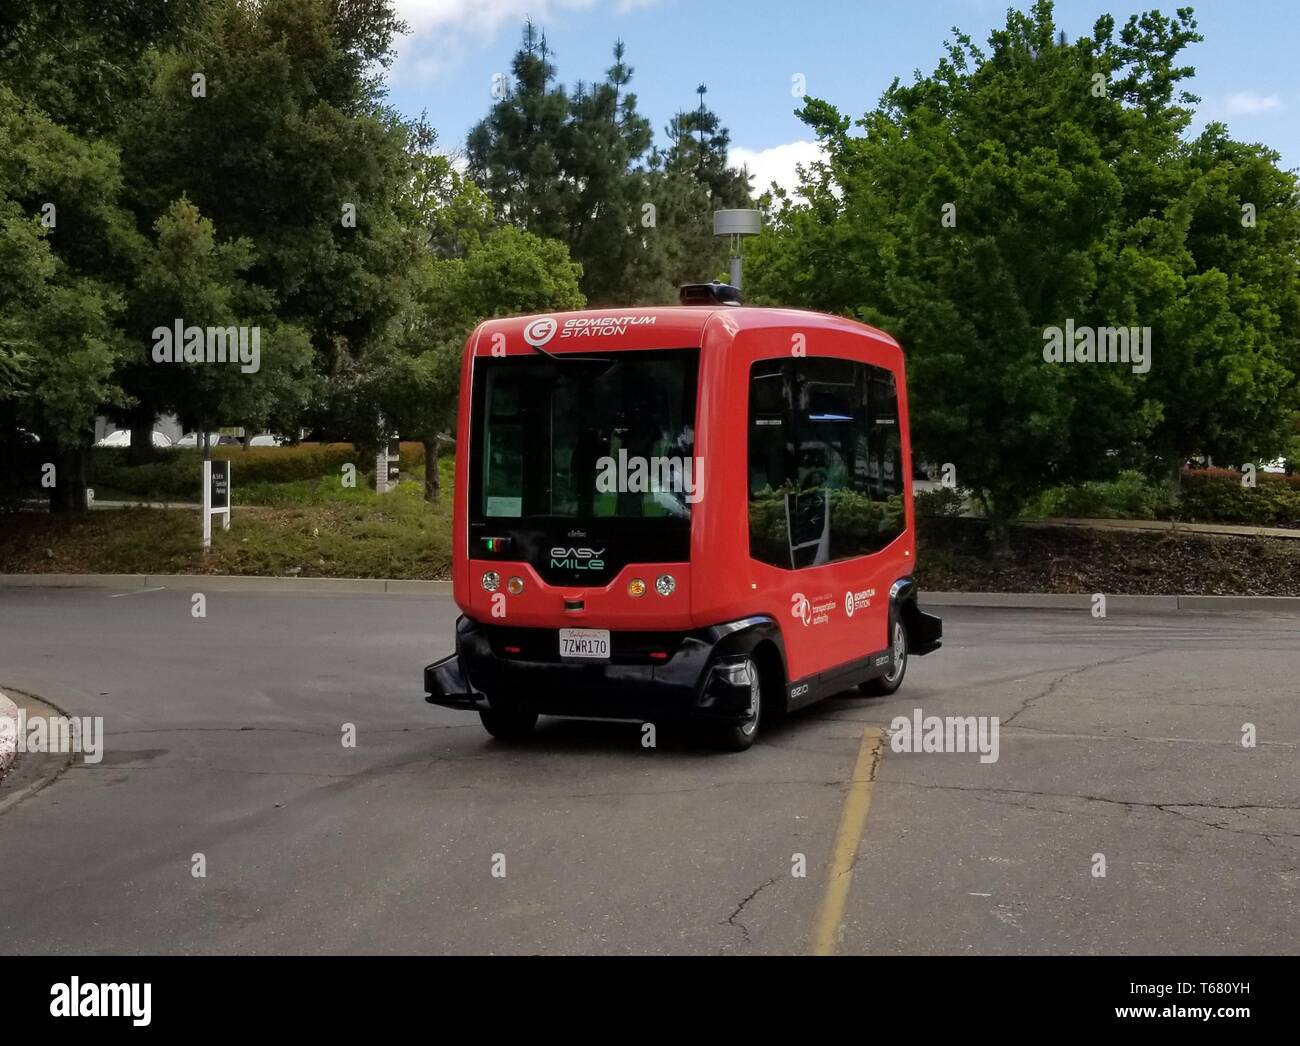 Driverless shuttle from self driving vehicle company Easy Mile driving through the Bishop Ranch office park in San Ramon, California, the first fully autonomous shuttle bus authorized to drive on public roads in the State of California, April 17, 2019. () Stock Photo